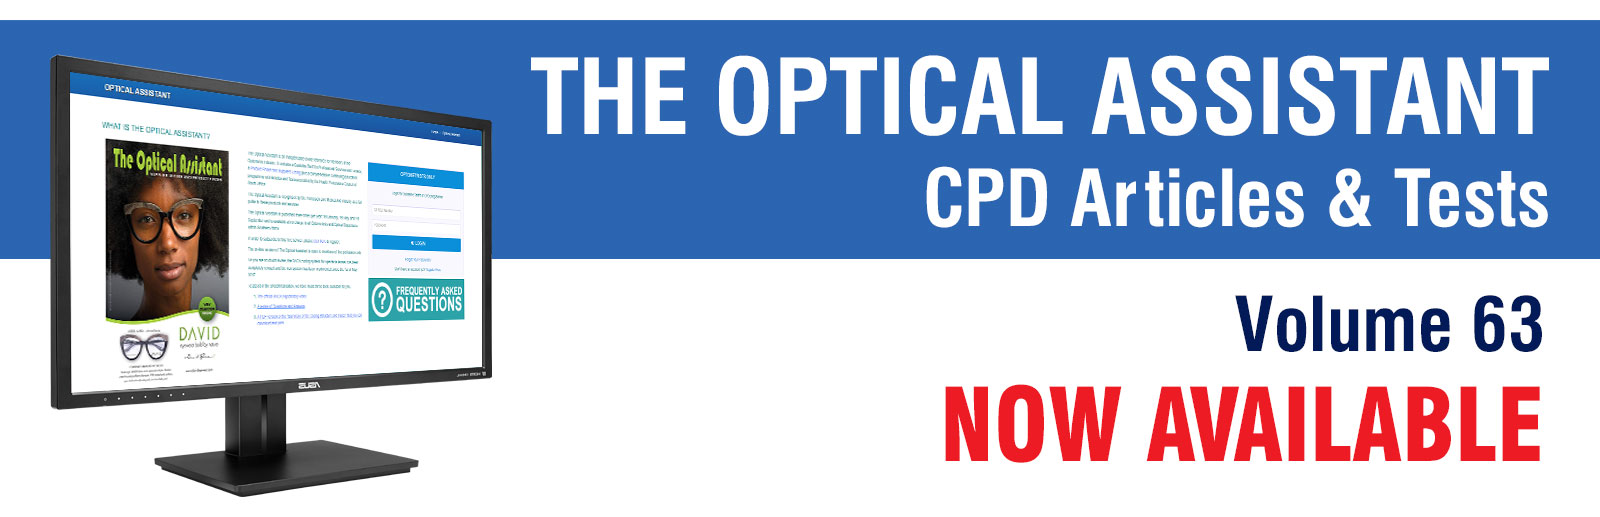 The Optical Assistant, Volume 63, Now Available